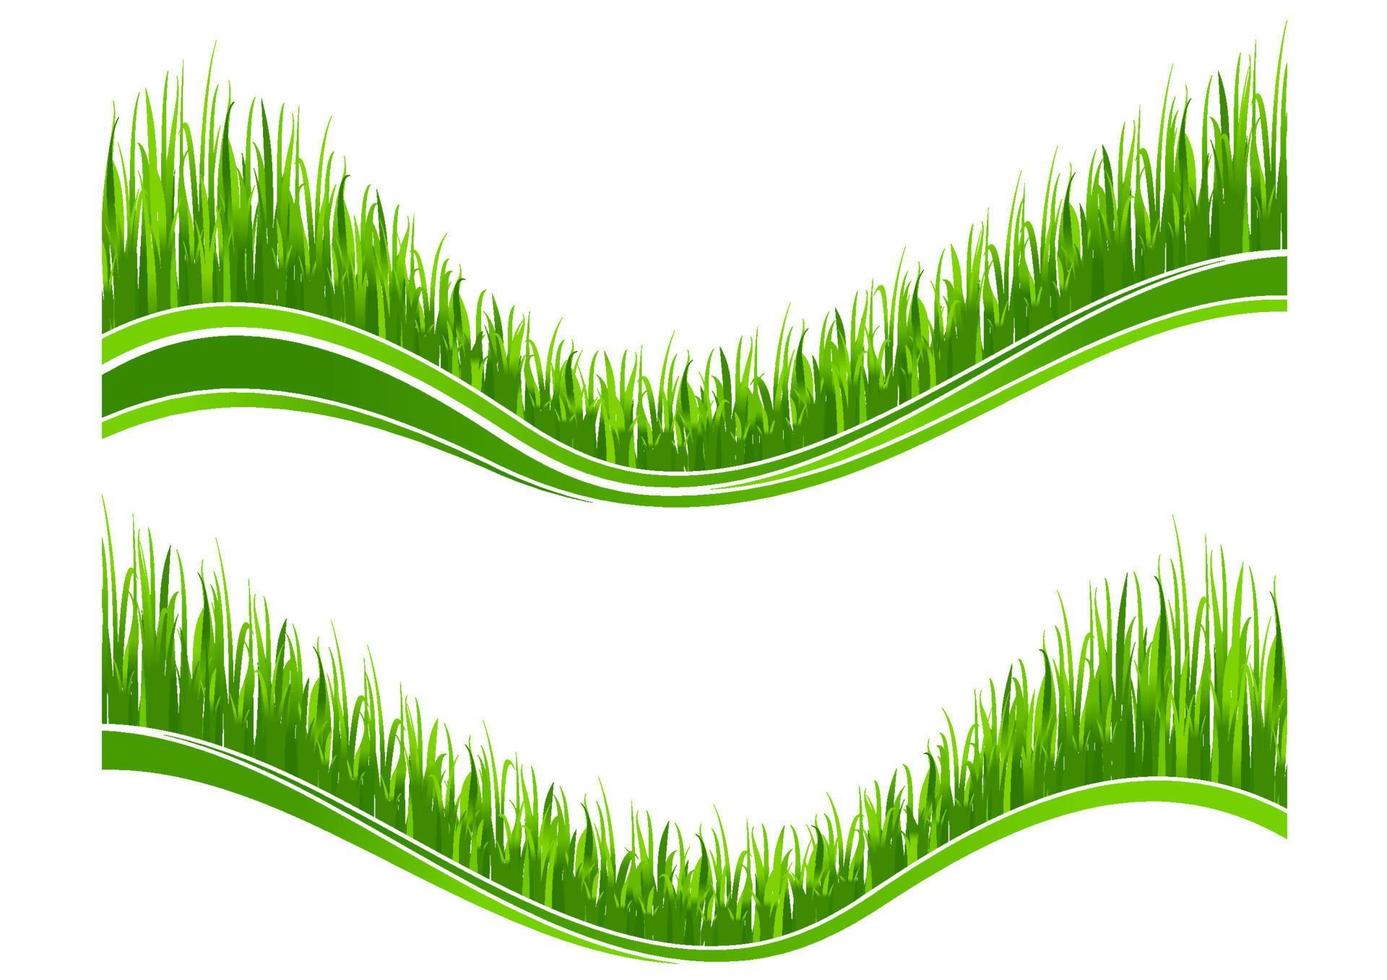 Two waves of green grass vector